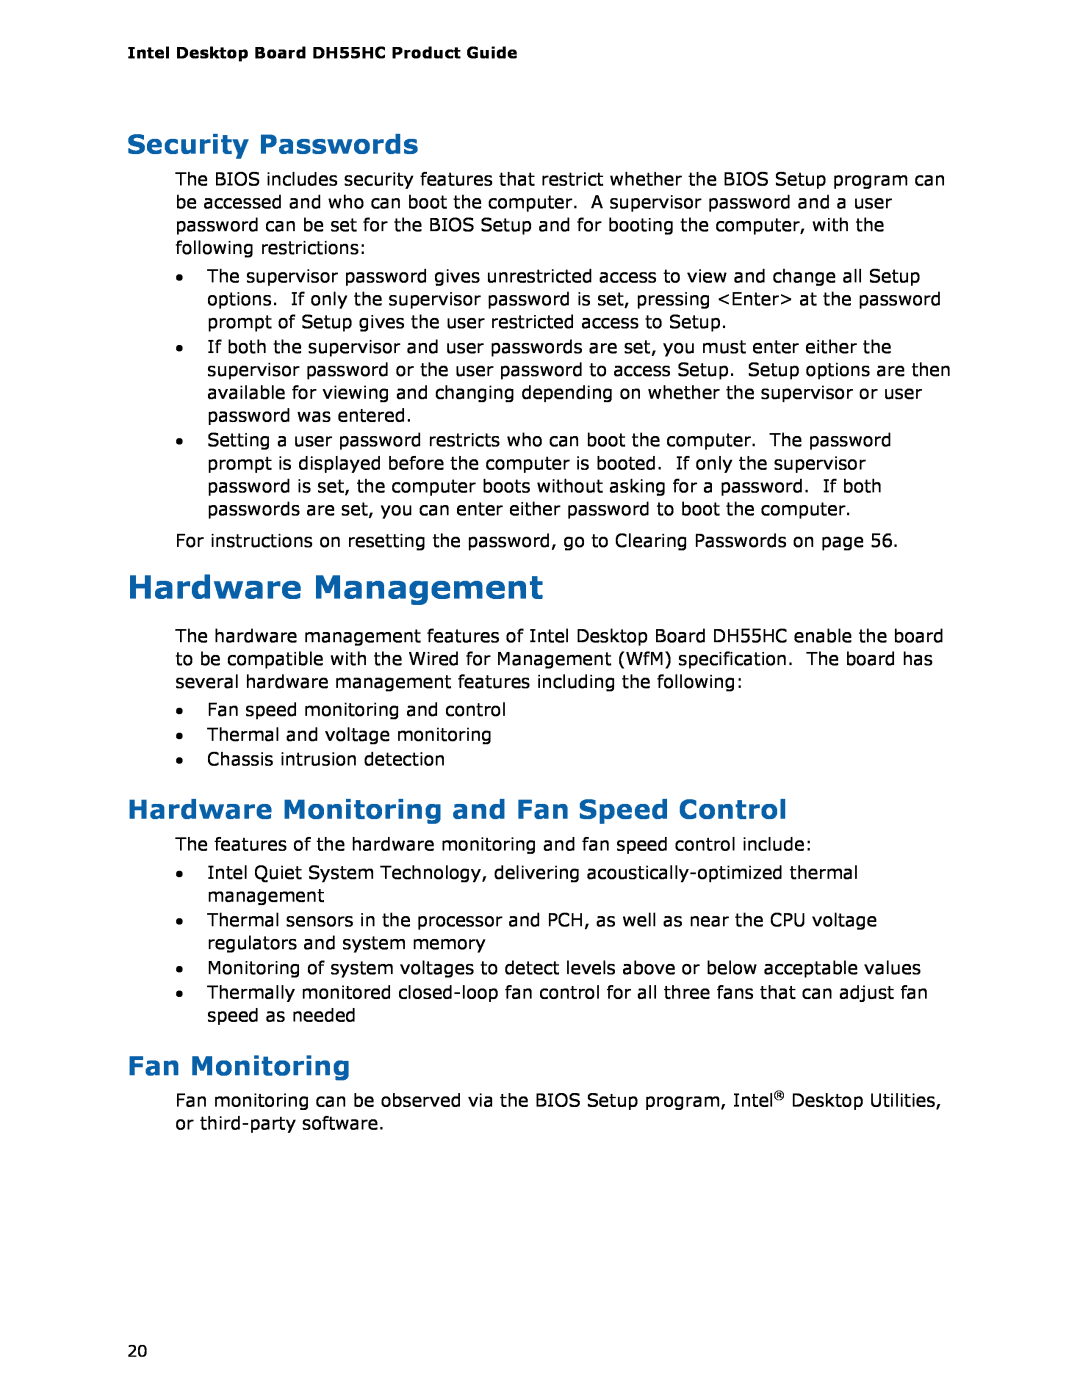 Intel BOXDH55HC manual Hardware Management, Security Passwords, Hardware Monitoring and Fan Speed Control, Fan Monitoring 